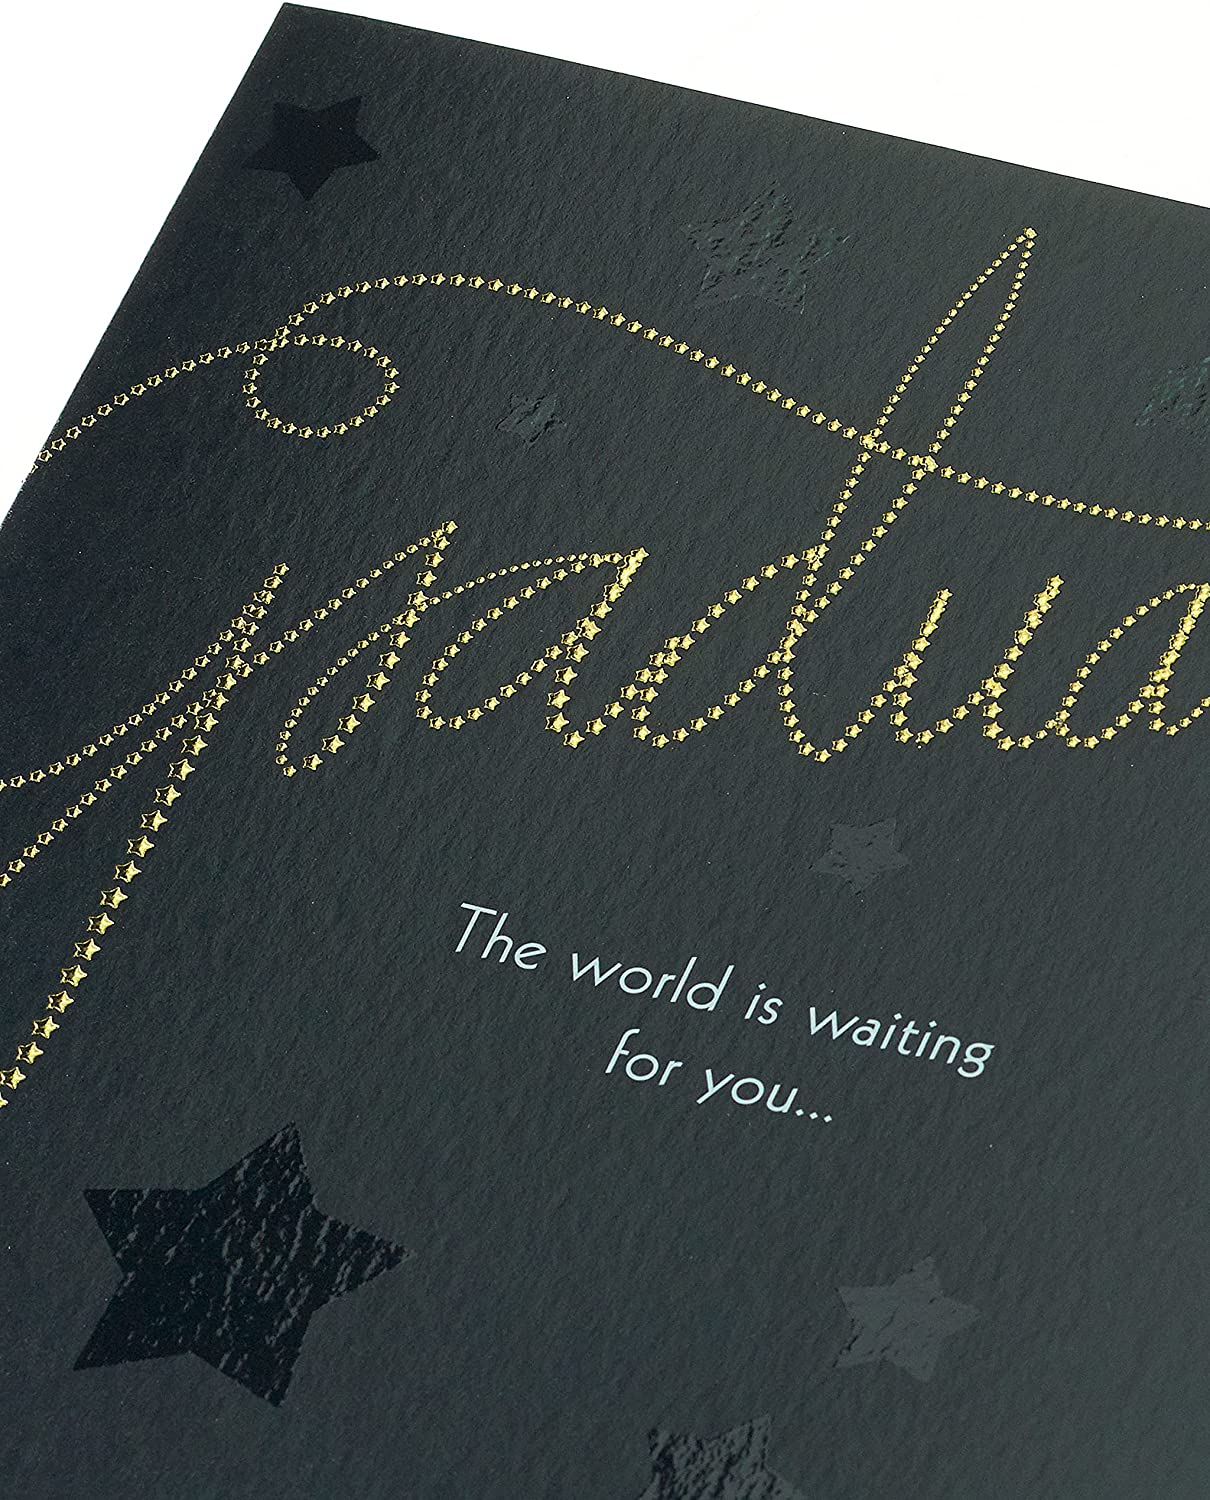 Contemporary Graduation Congratulations Card with Elegant Foil and Embossed Finish 